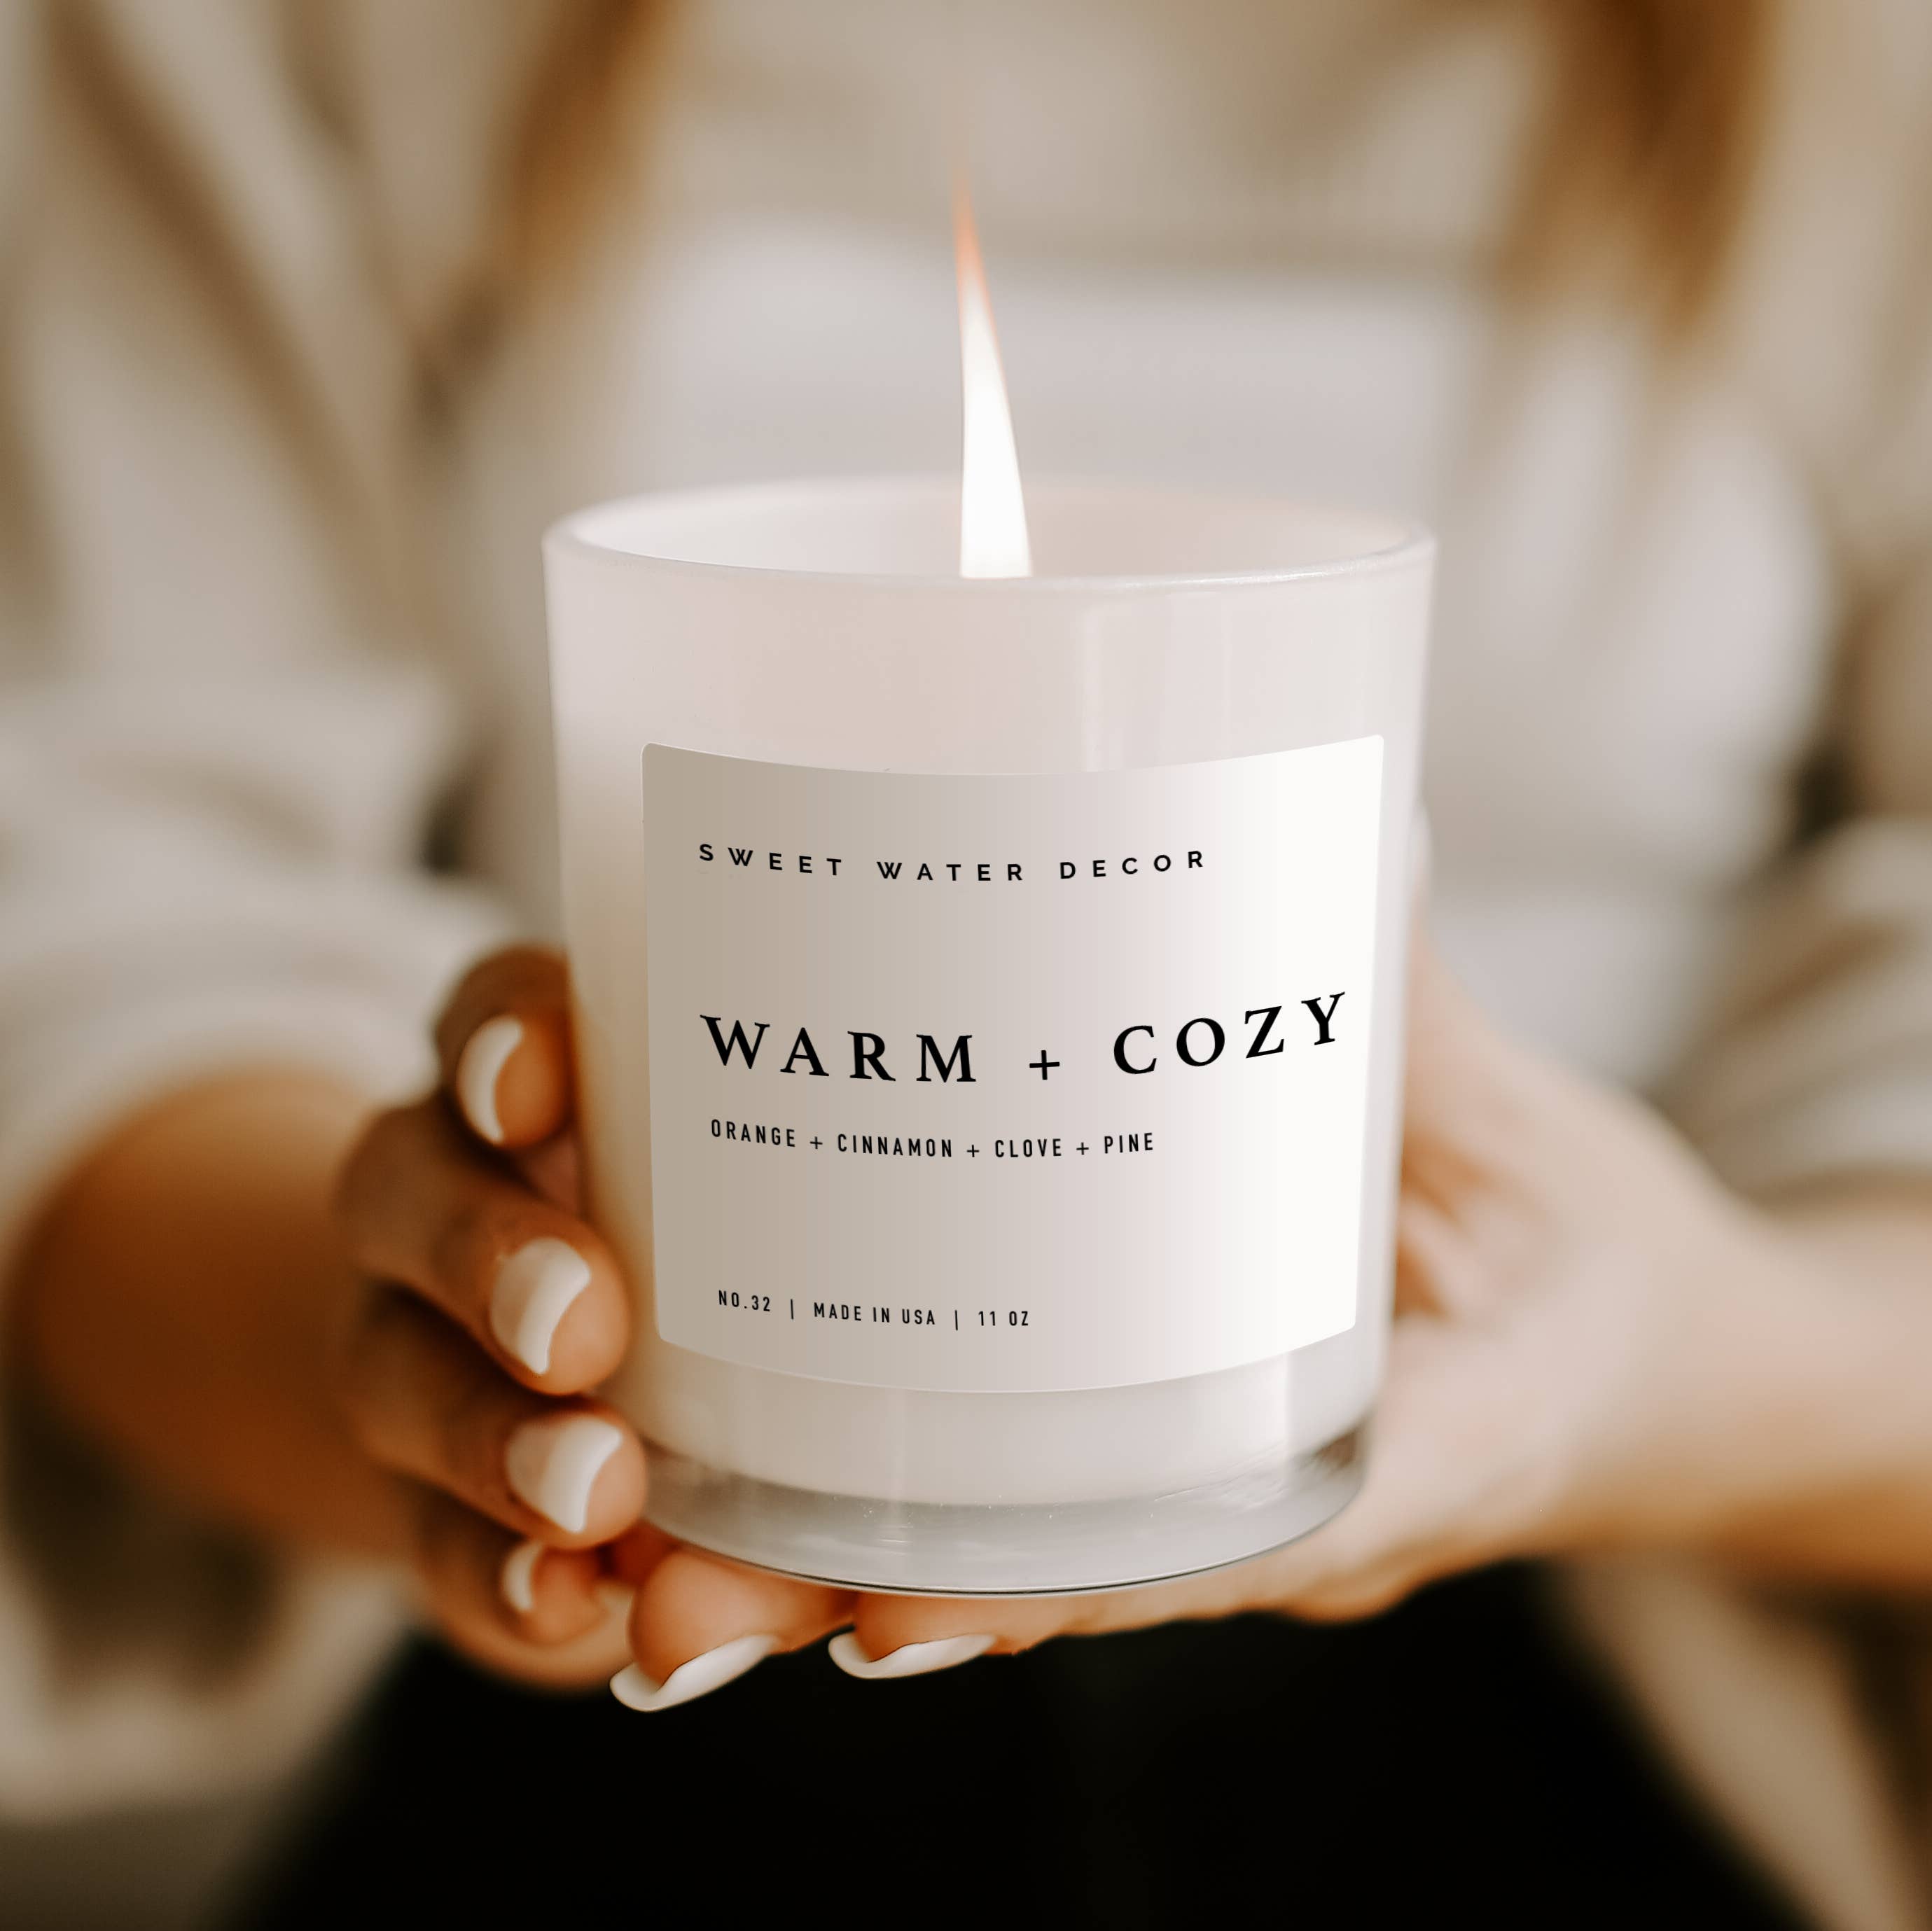 Warm and Cozy 11 oz Soy Candle- Christmas Home Decor & Gifts